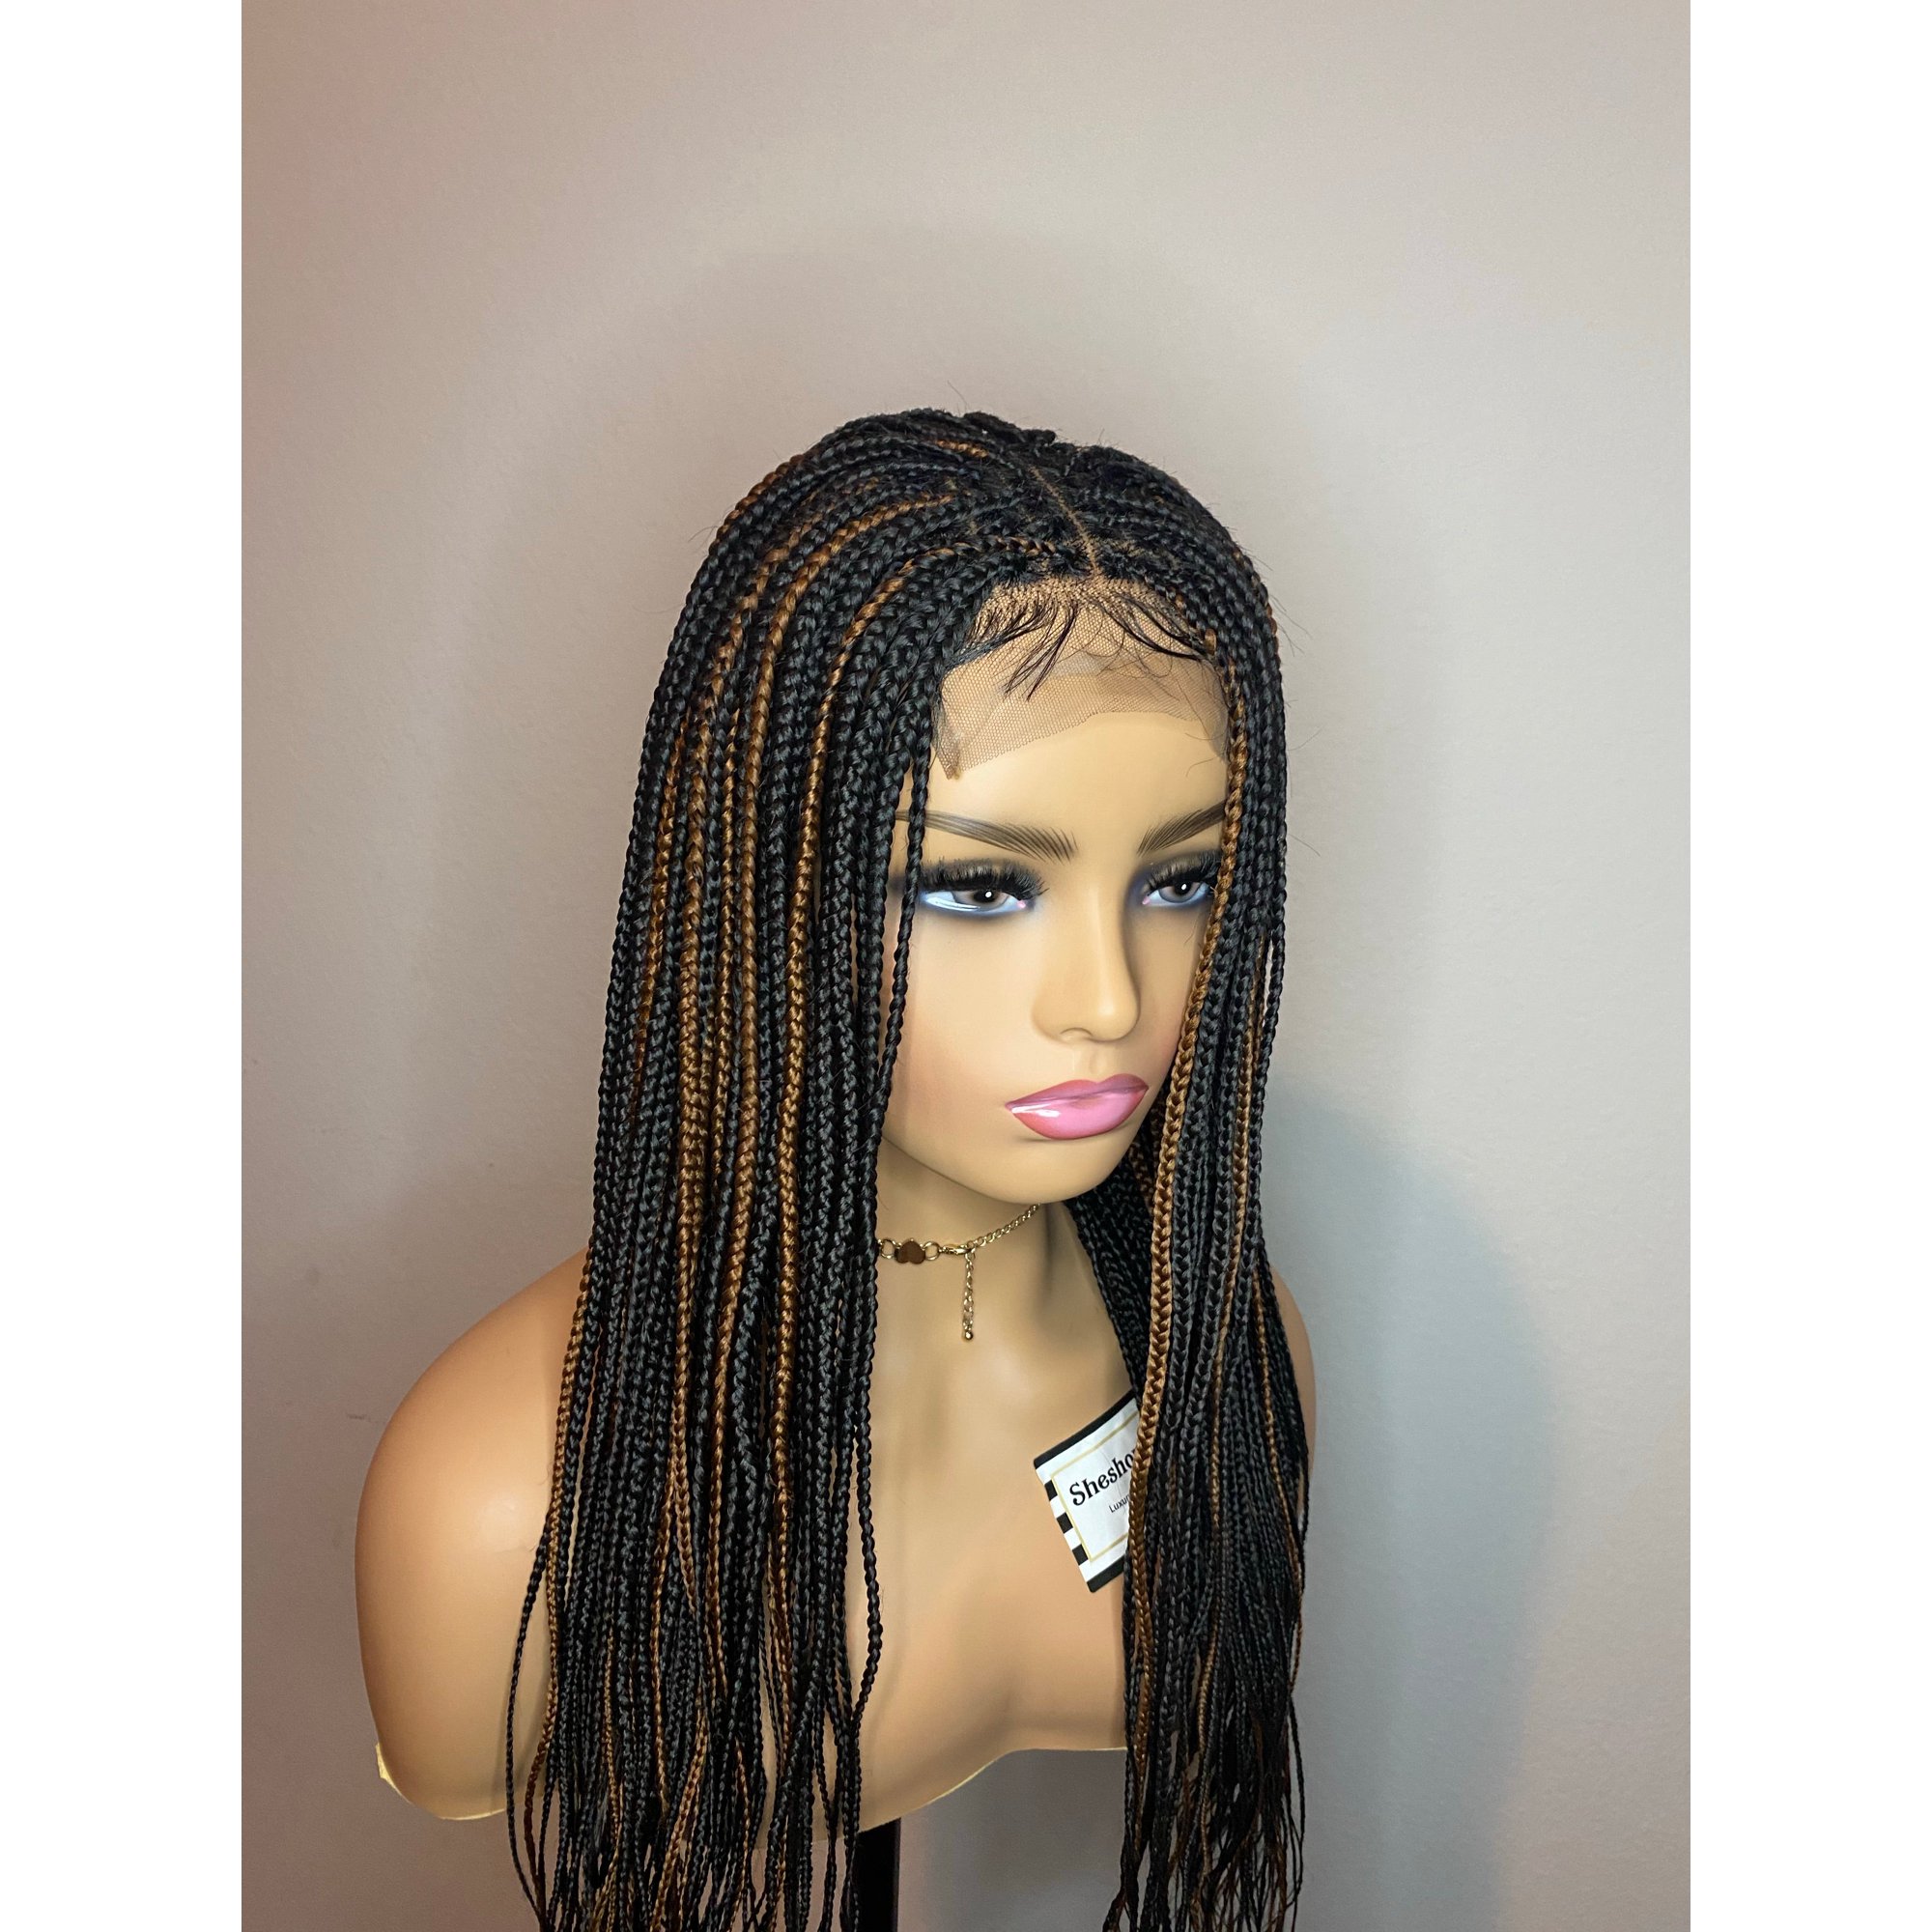 Handmade braided wig, Braided Wigs Lace Front